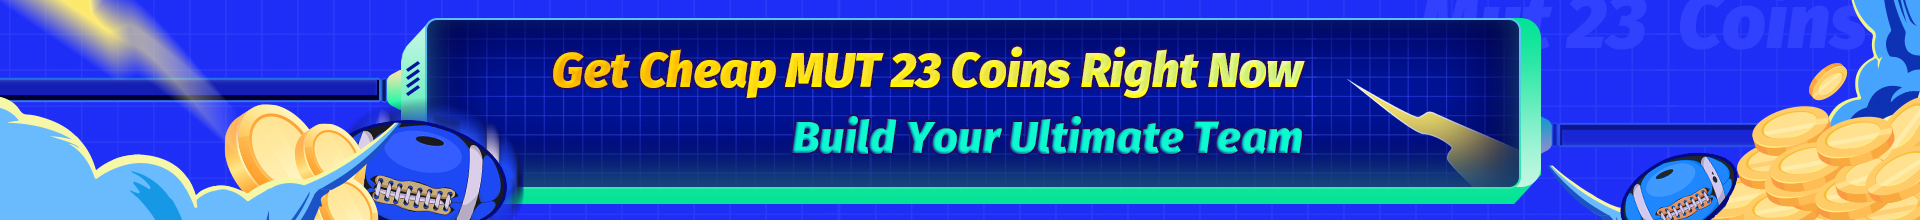 MUT 23 Coins